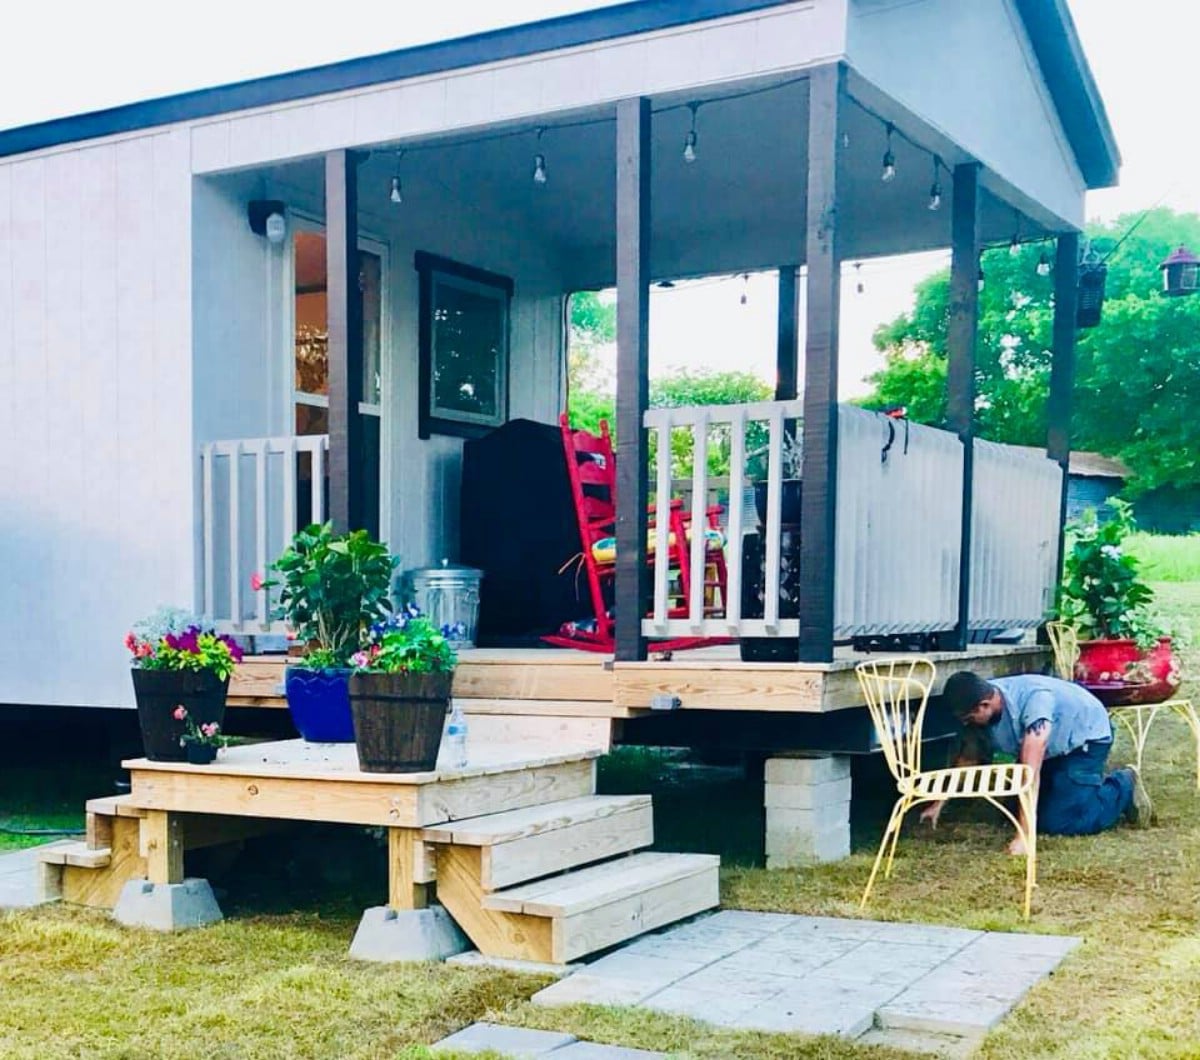 This Charming 399-Square-Foot Tiny House is Filled With Storage Space